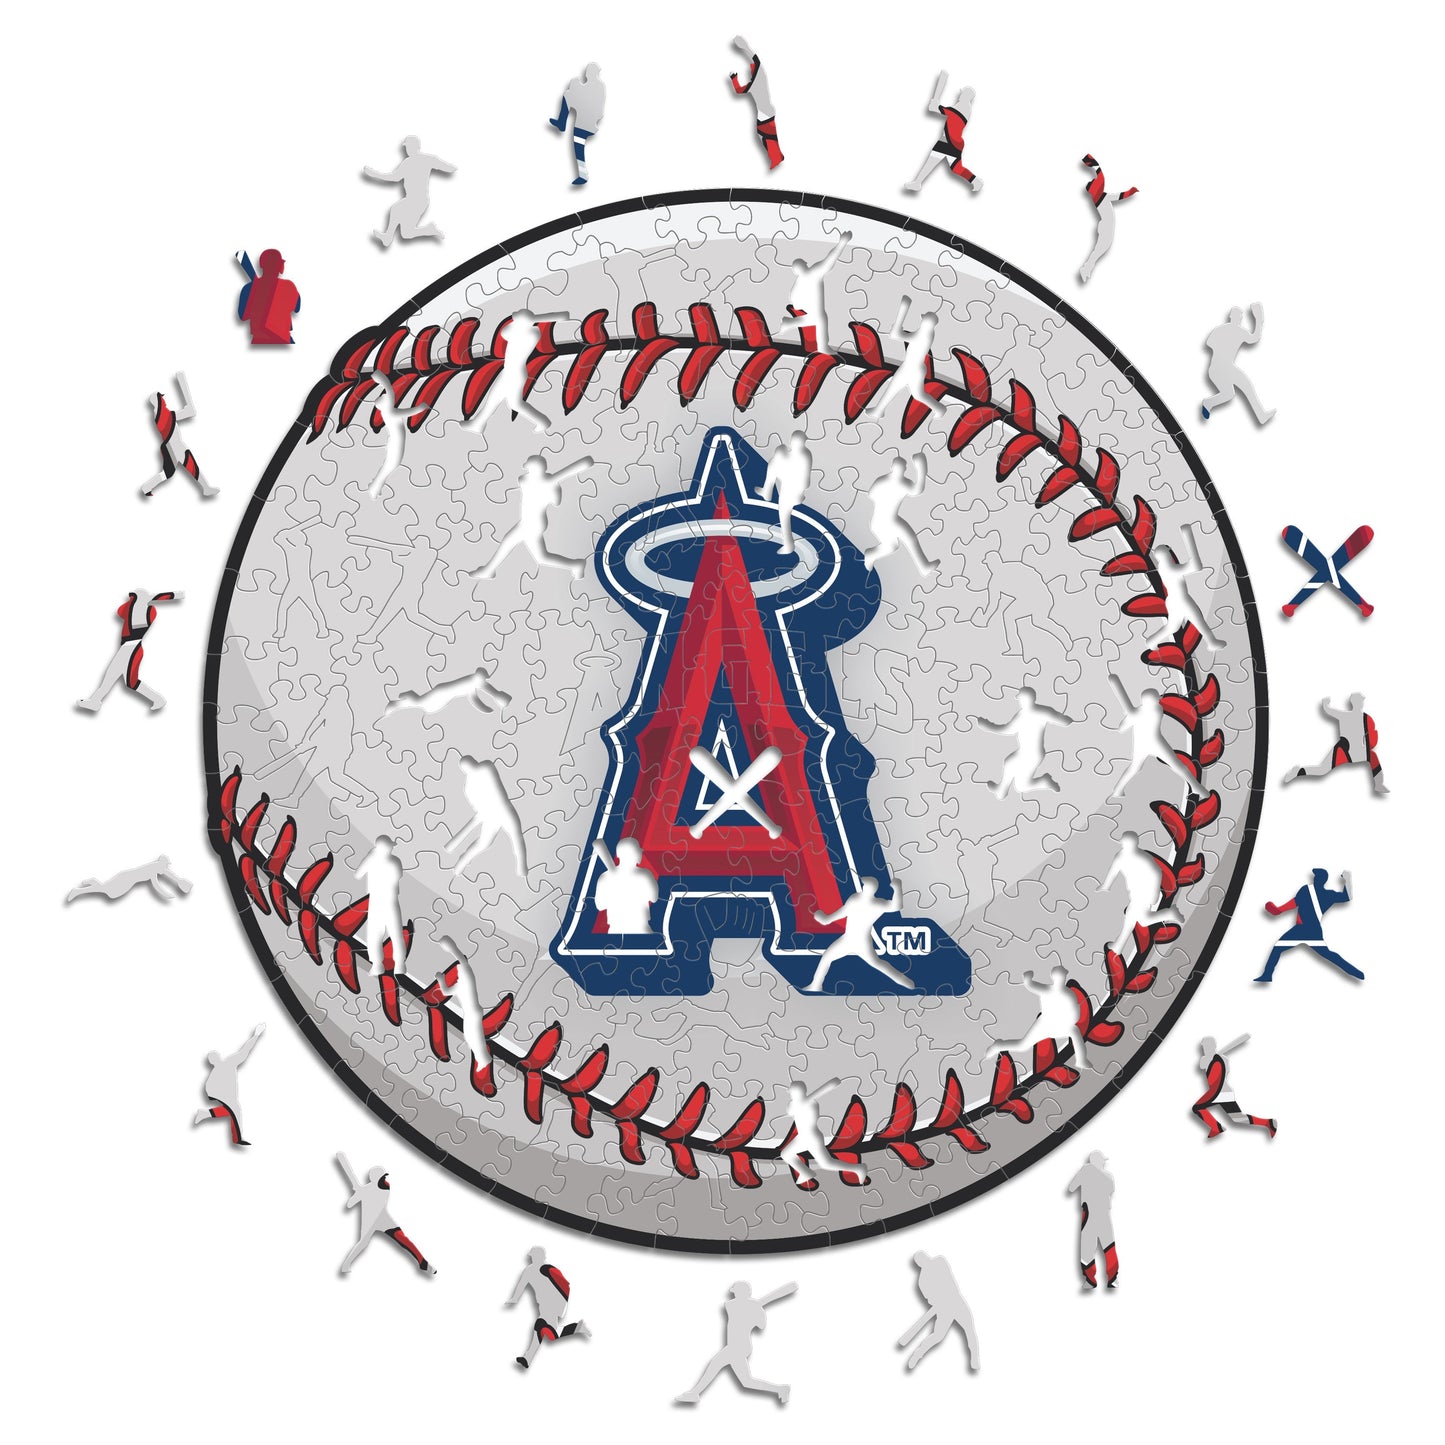 Los Angeles Angels® - Wooden Puzzle